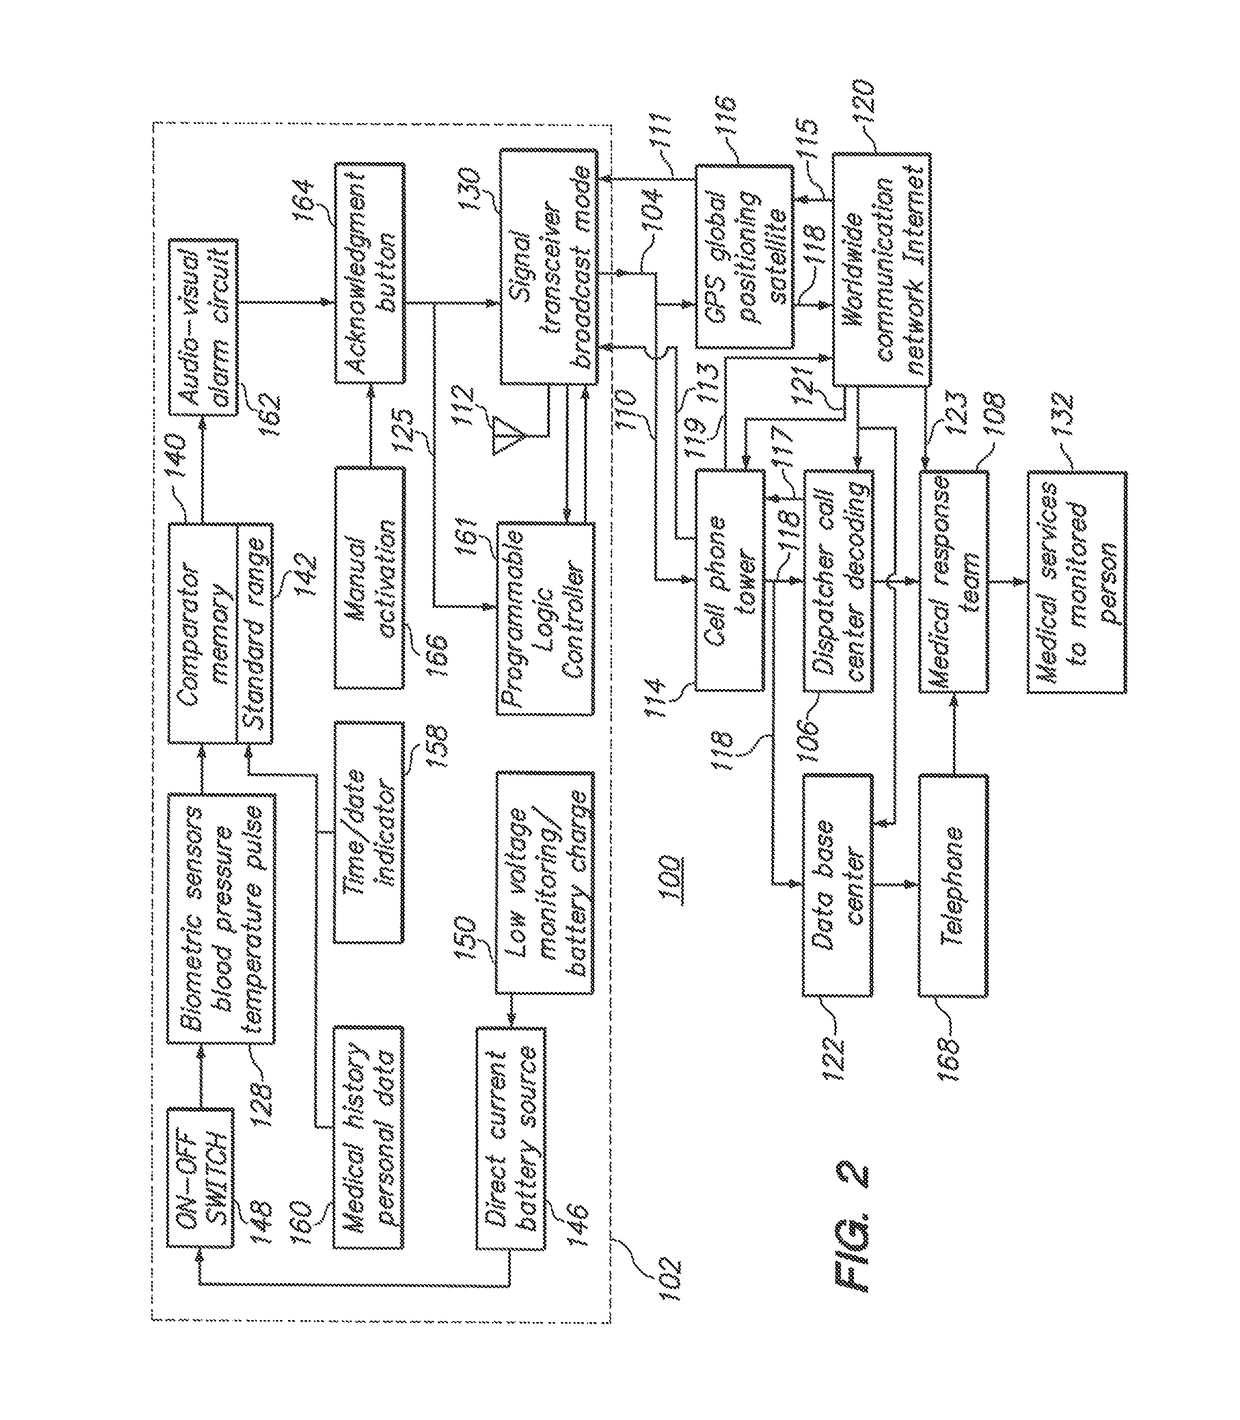 Personal monitoring and emergency communications system and method